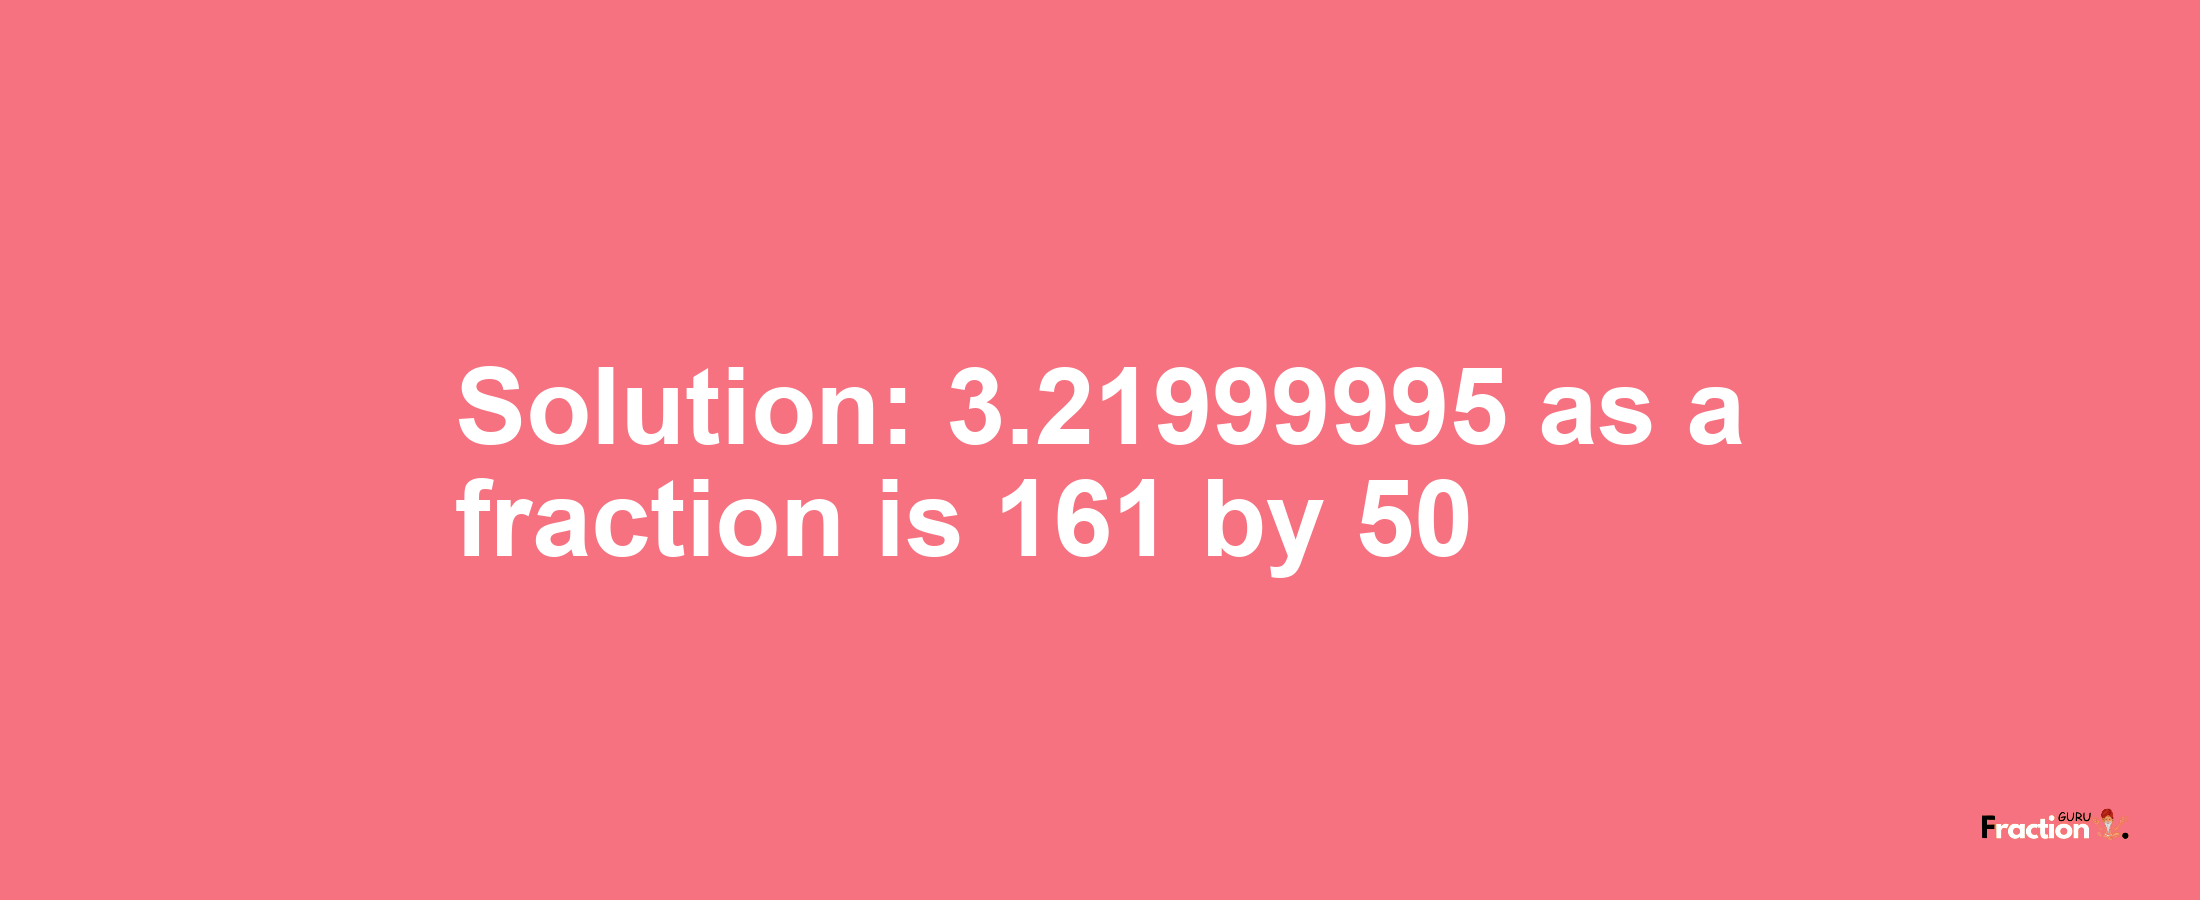 Solution:3.21999995 as a fraction is 161/50